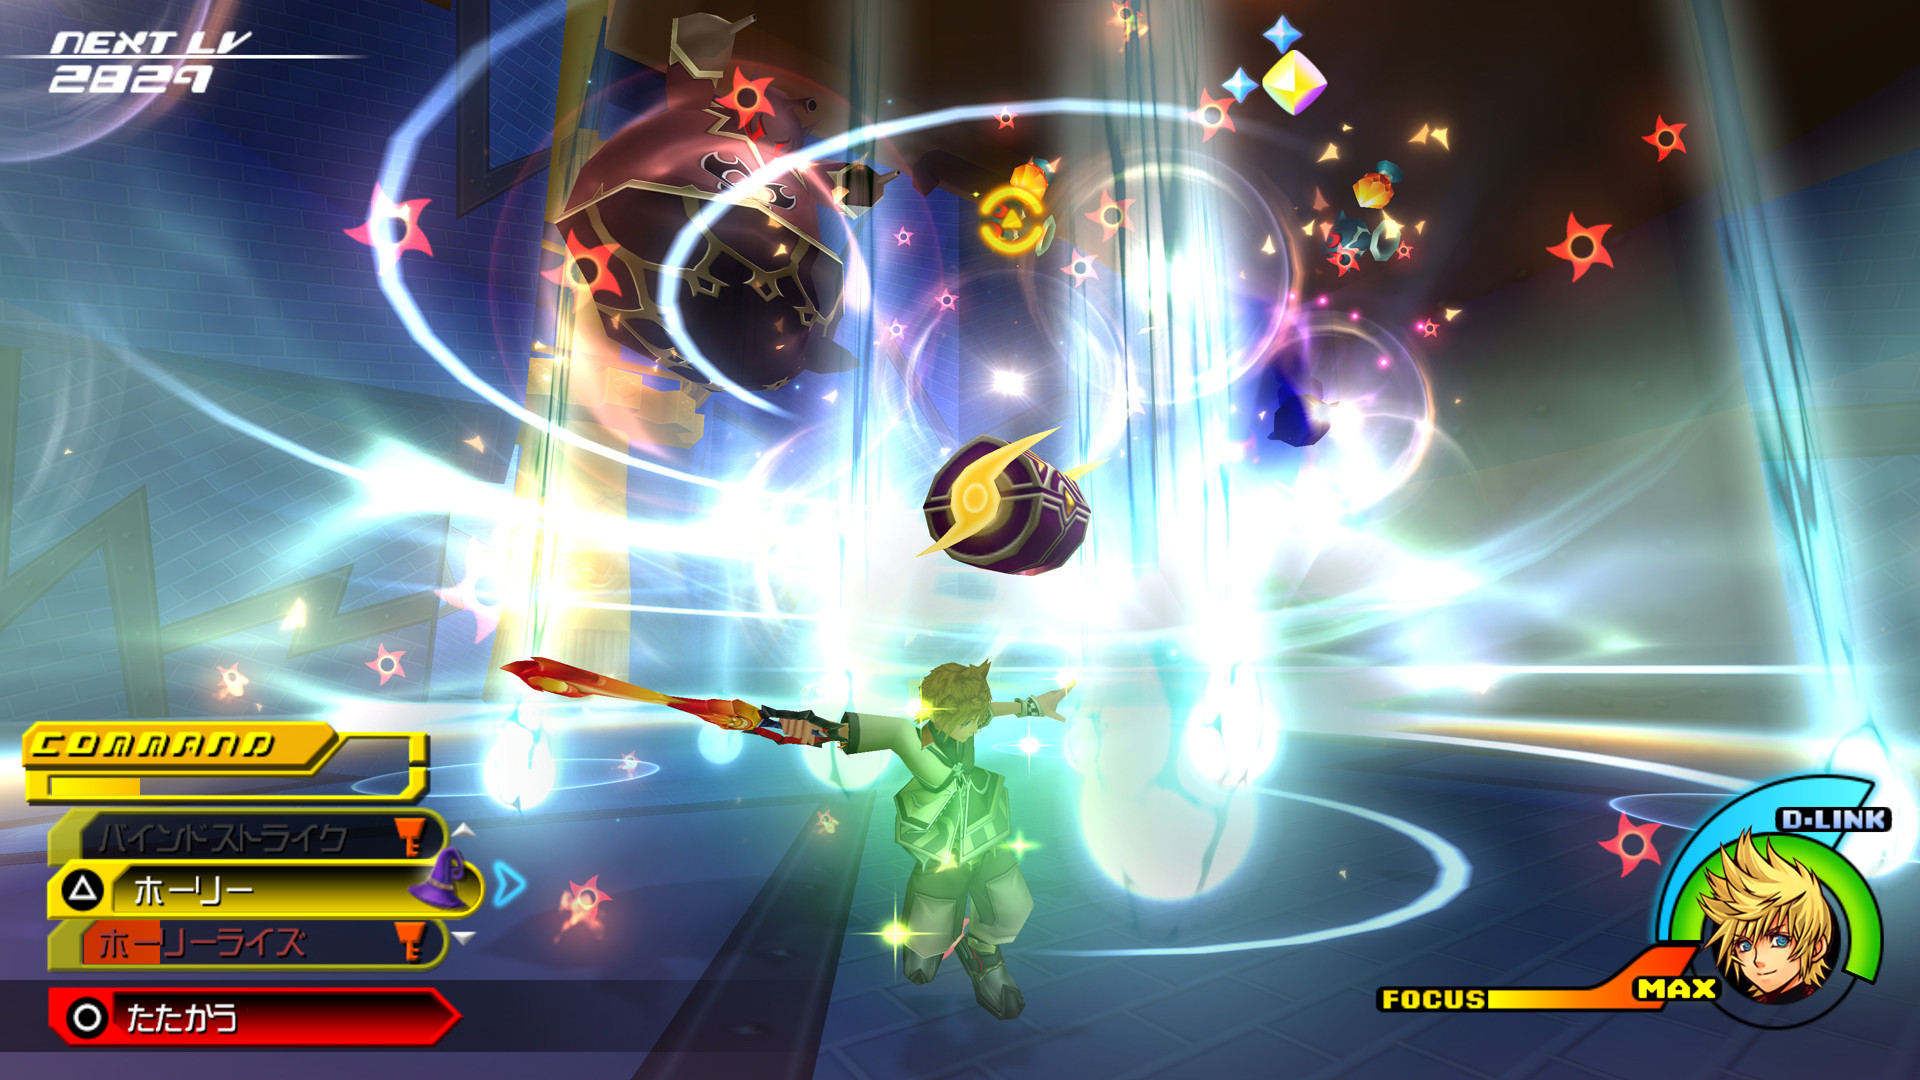 1920x1080 Kingdom Hearts: Birth By Sleep Screenshots - Don't Forget About the PSP!